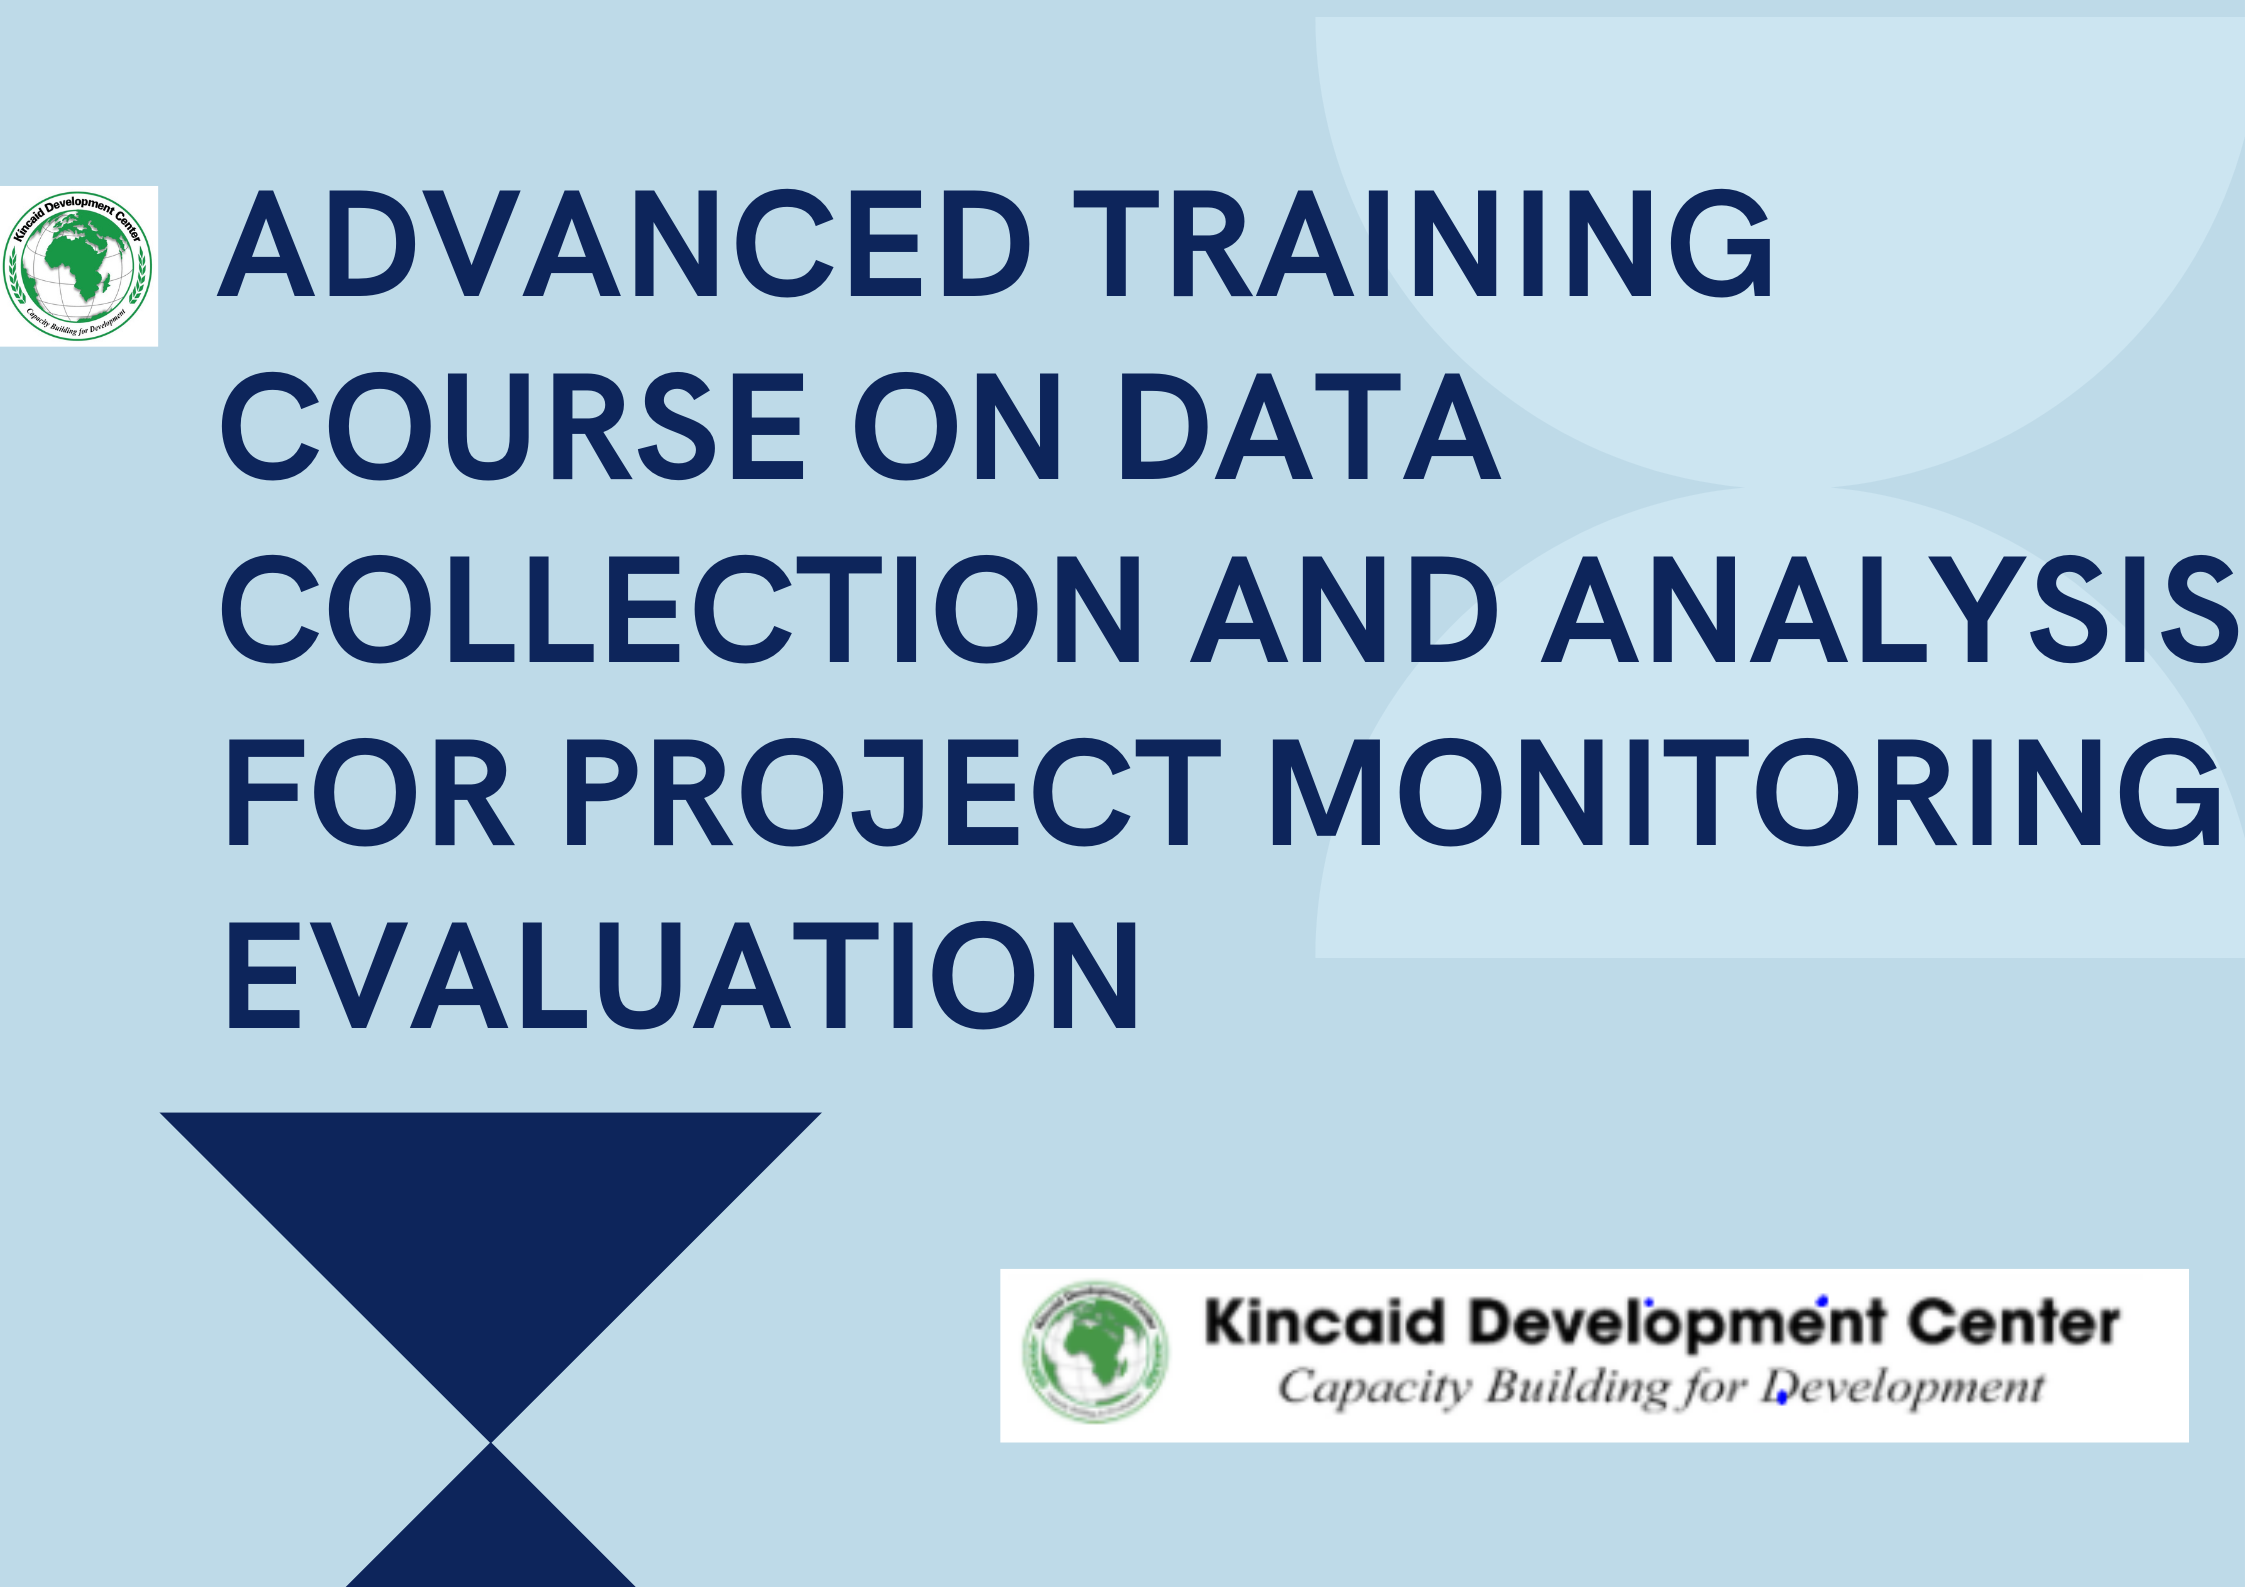 ADVANCED TRAINING COURSE ON DATA COLLECTION AND ANALYSIS FOR PROJECT MONITORING EVALUATION, Nairobi, Kenya